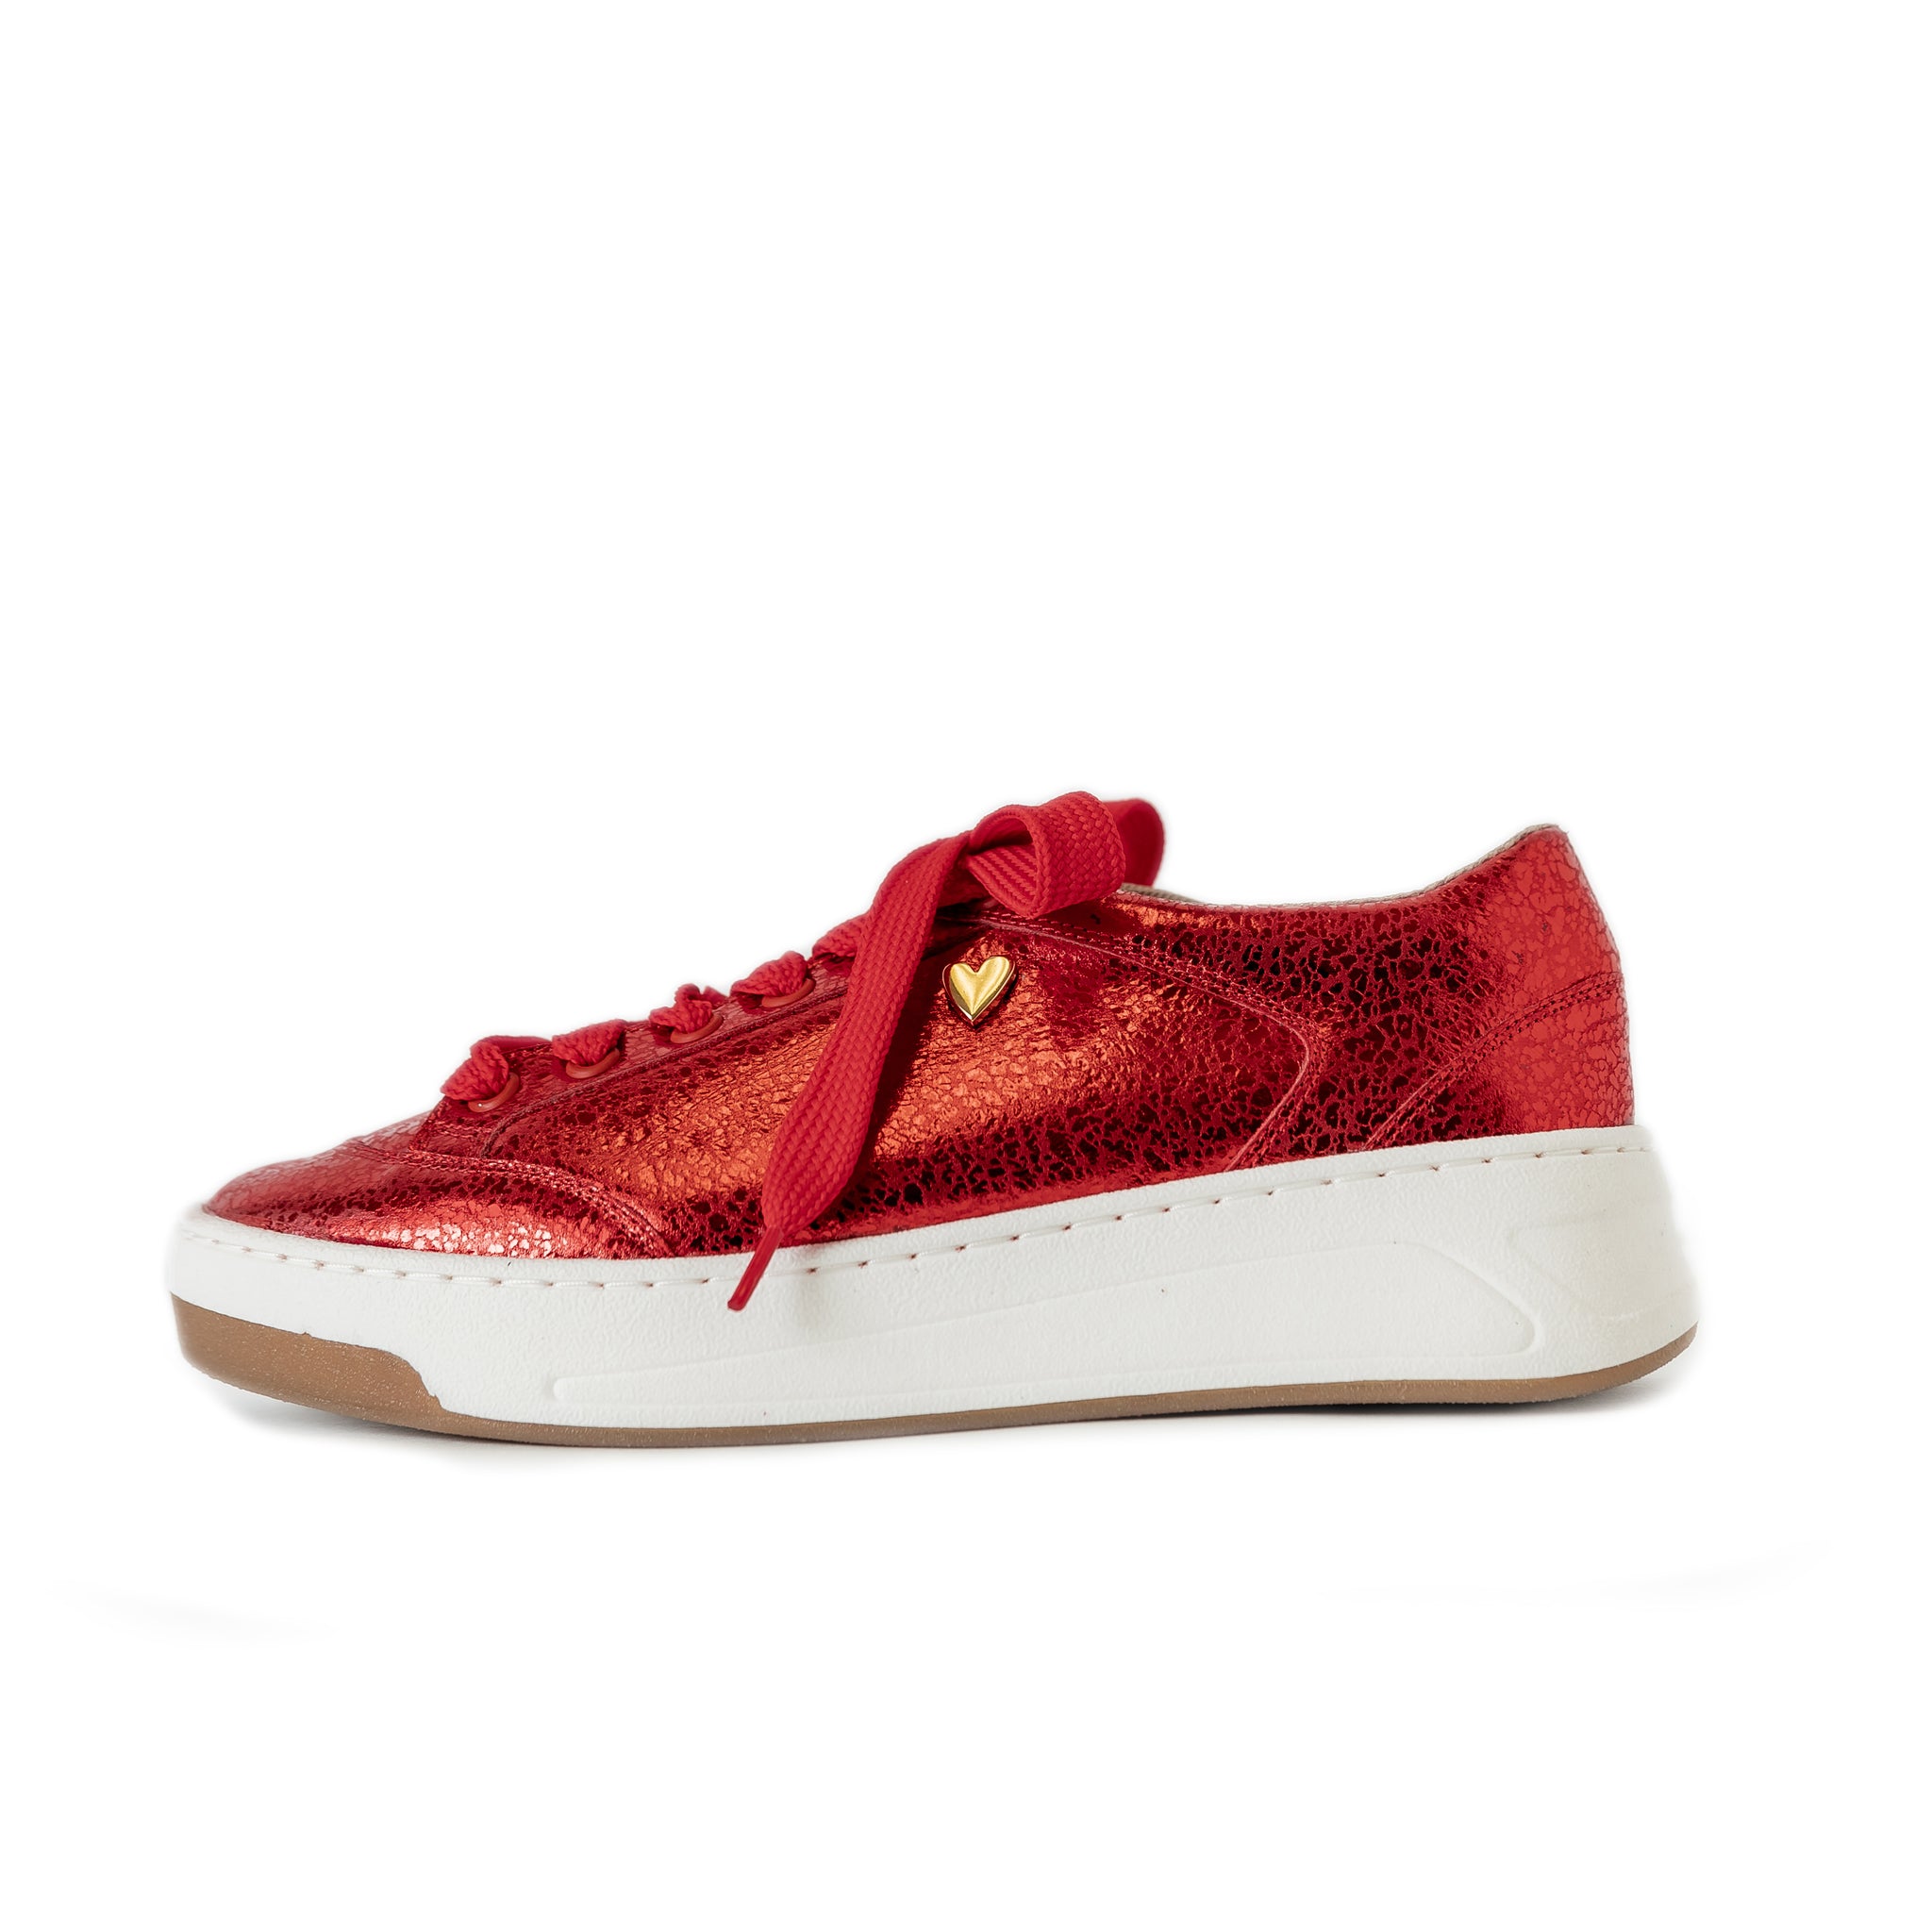 Krista Red Sneakers by Nataly Mendez Genuine leather upper material Genuine leather insole lining Rubber platform lining American sizes Flexible rubber outsole Handcrafted 1.5 inch heel height 1 inch platform